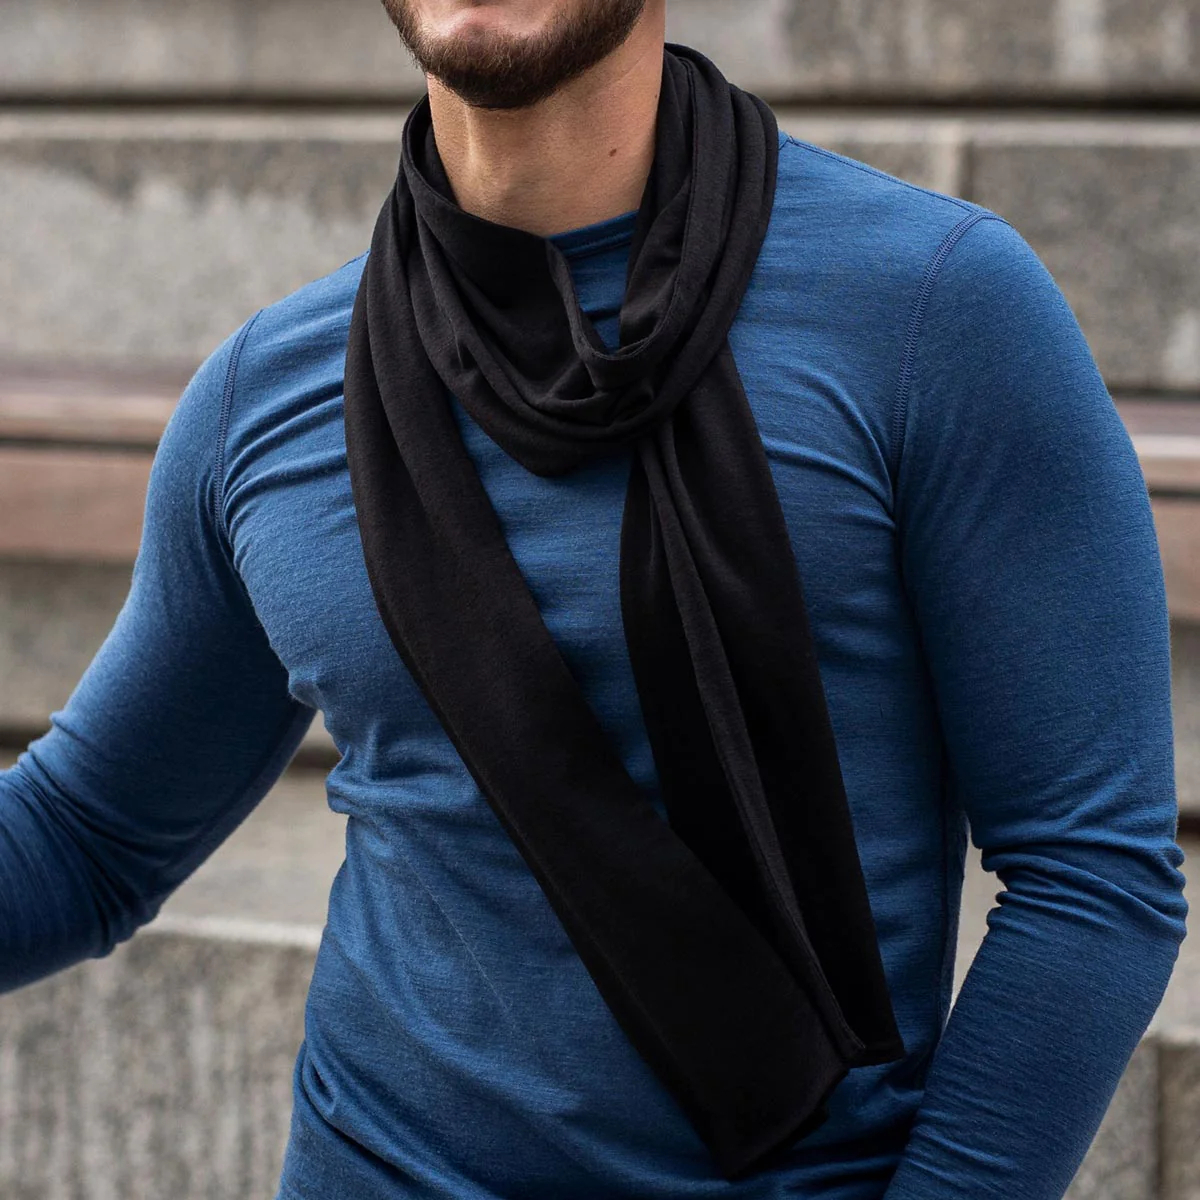 Men’s scarf: Elevate Your Winter Look with Sophisticated插图4